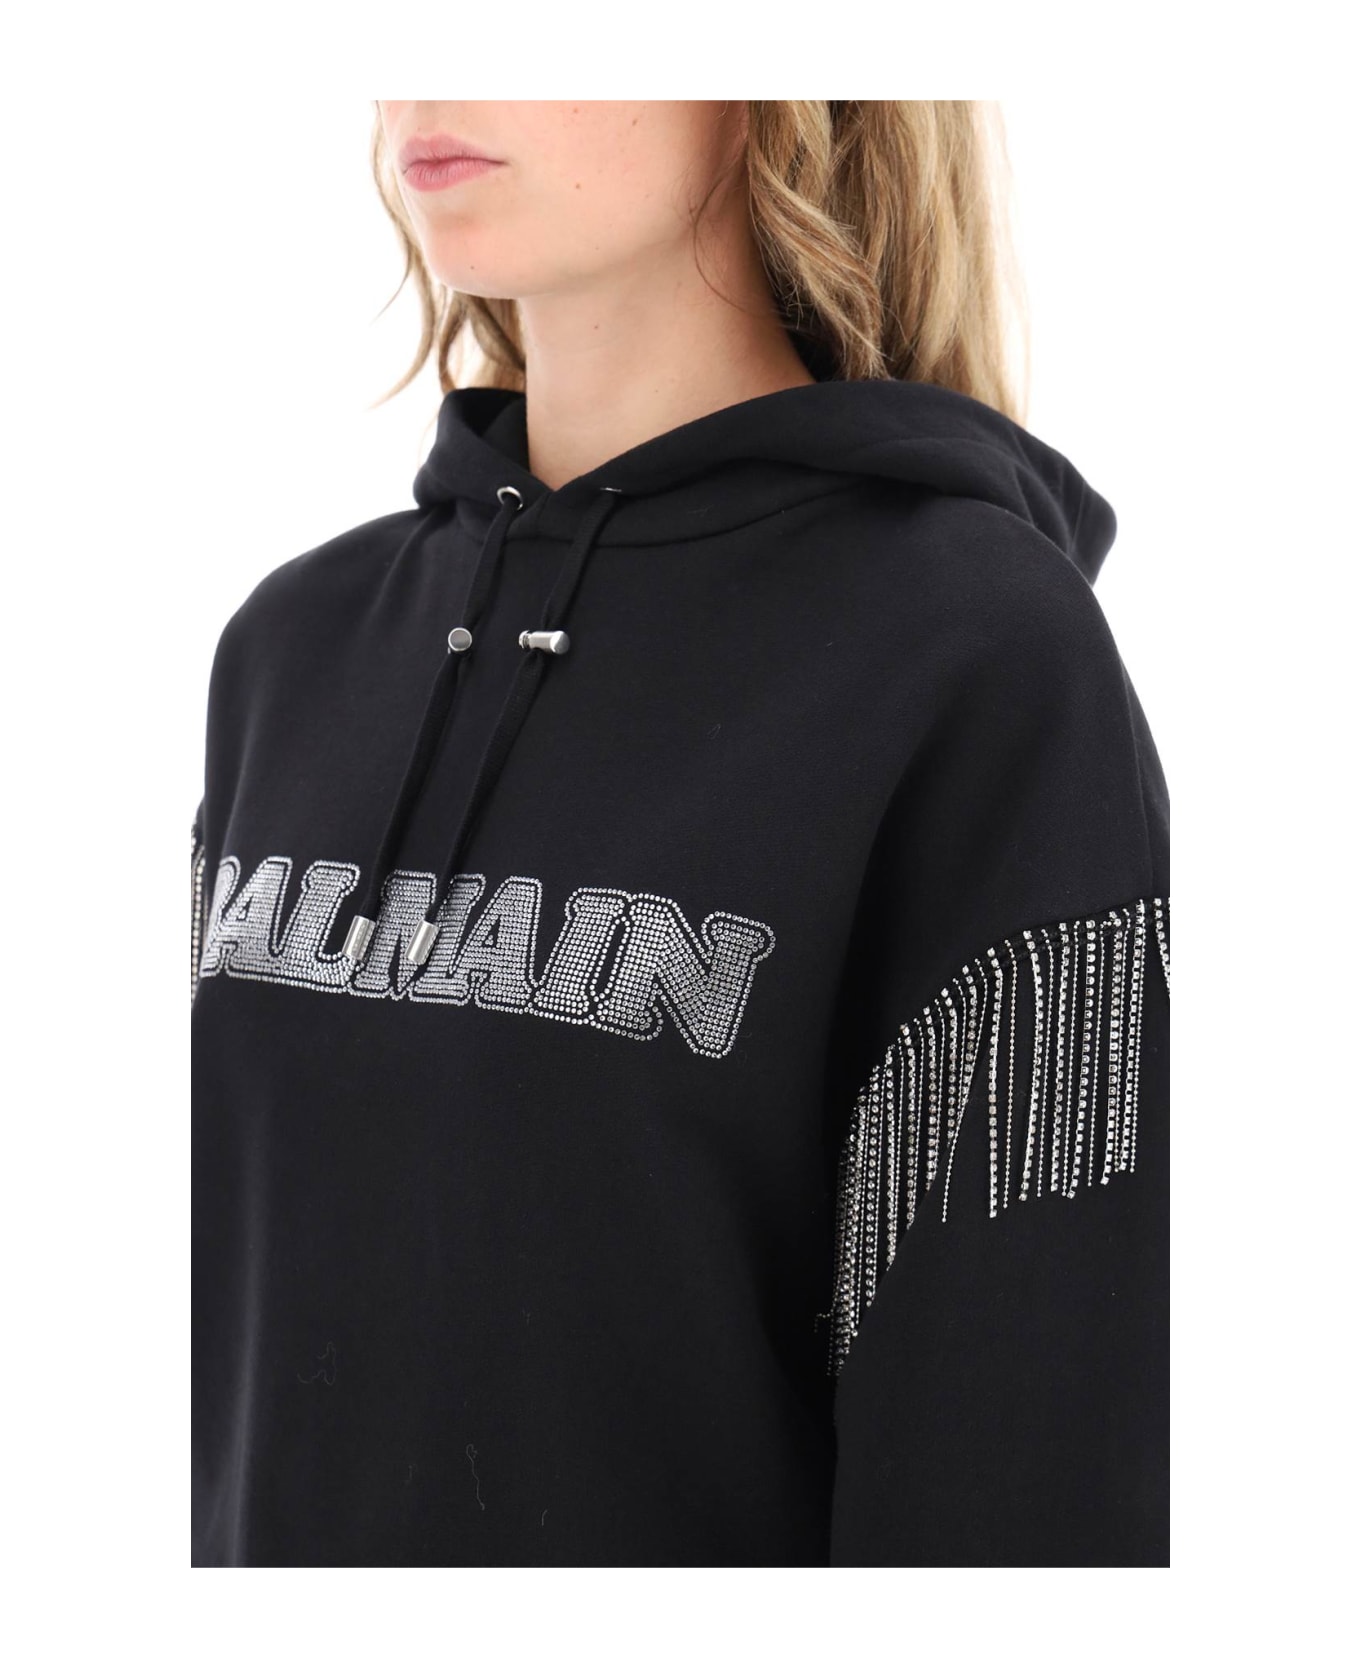 Balmain Cropped Hoodie With Rhinestone-studded Logo And Crystal Cupchains - NOIR CRISTAL (Black)